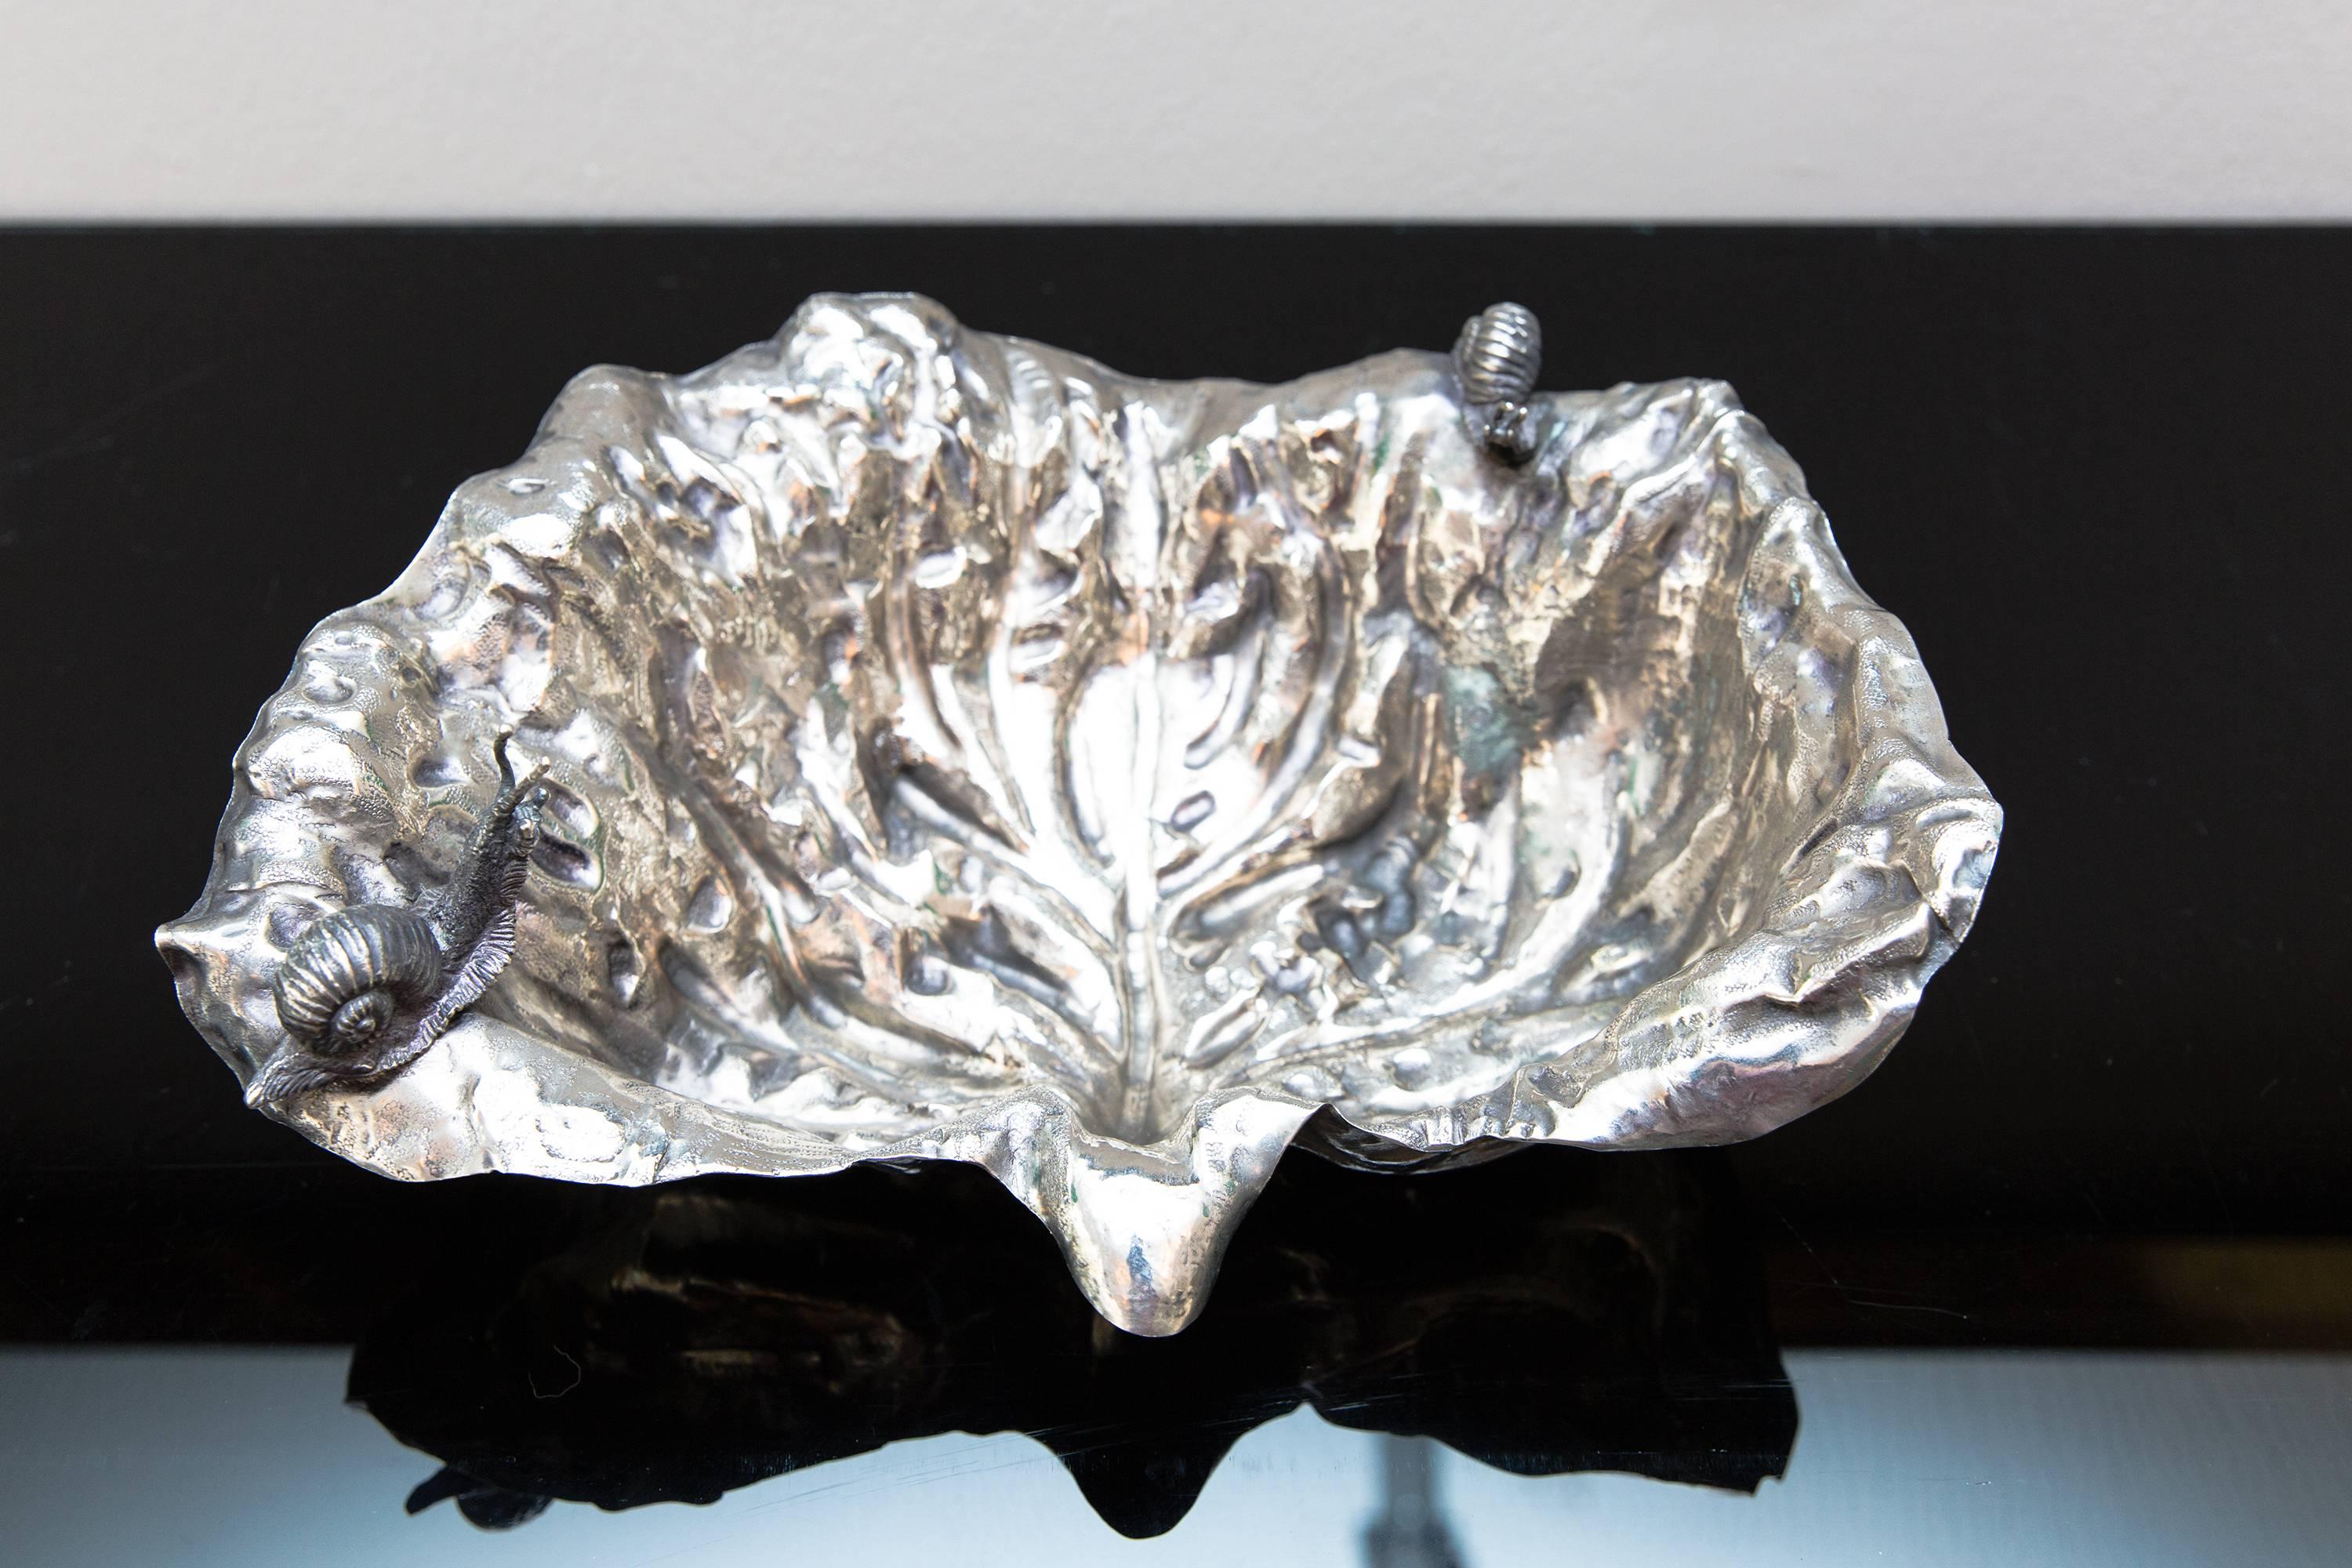 Very rare bowl by Gabriella Crespi, Italy, circa 1970, silver plated brass, with snakes elements, cabbage leaf, signed on the side. Authenticity by the Archivio Gabriella Crespi is enclosed.